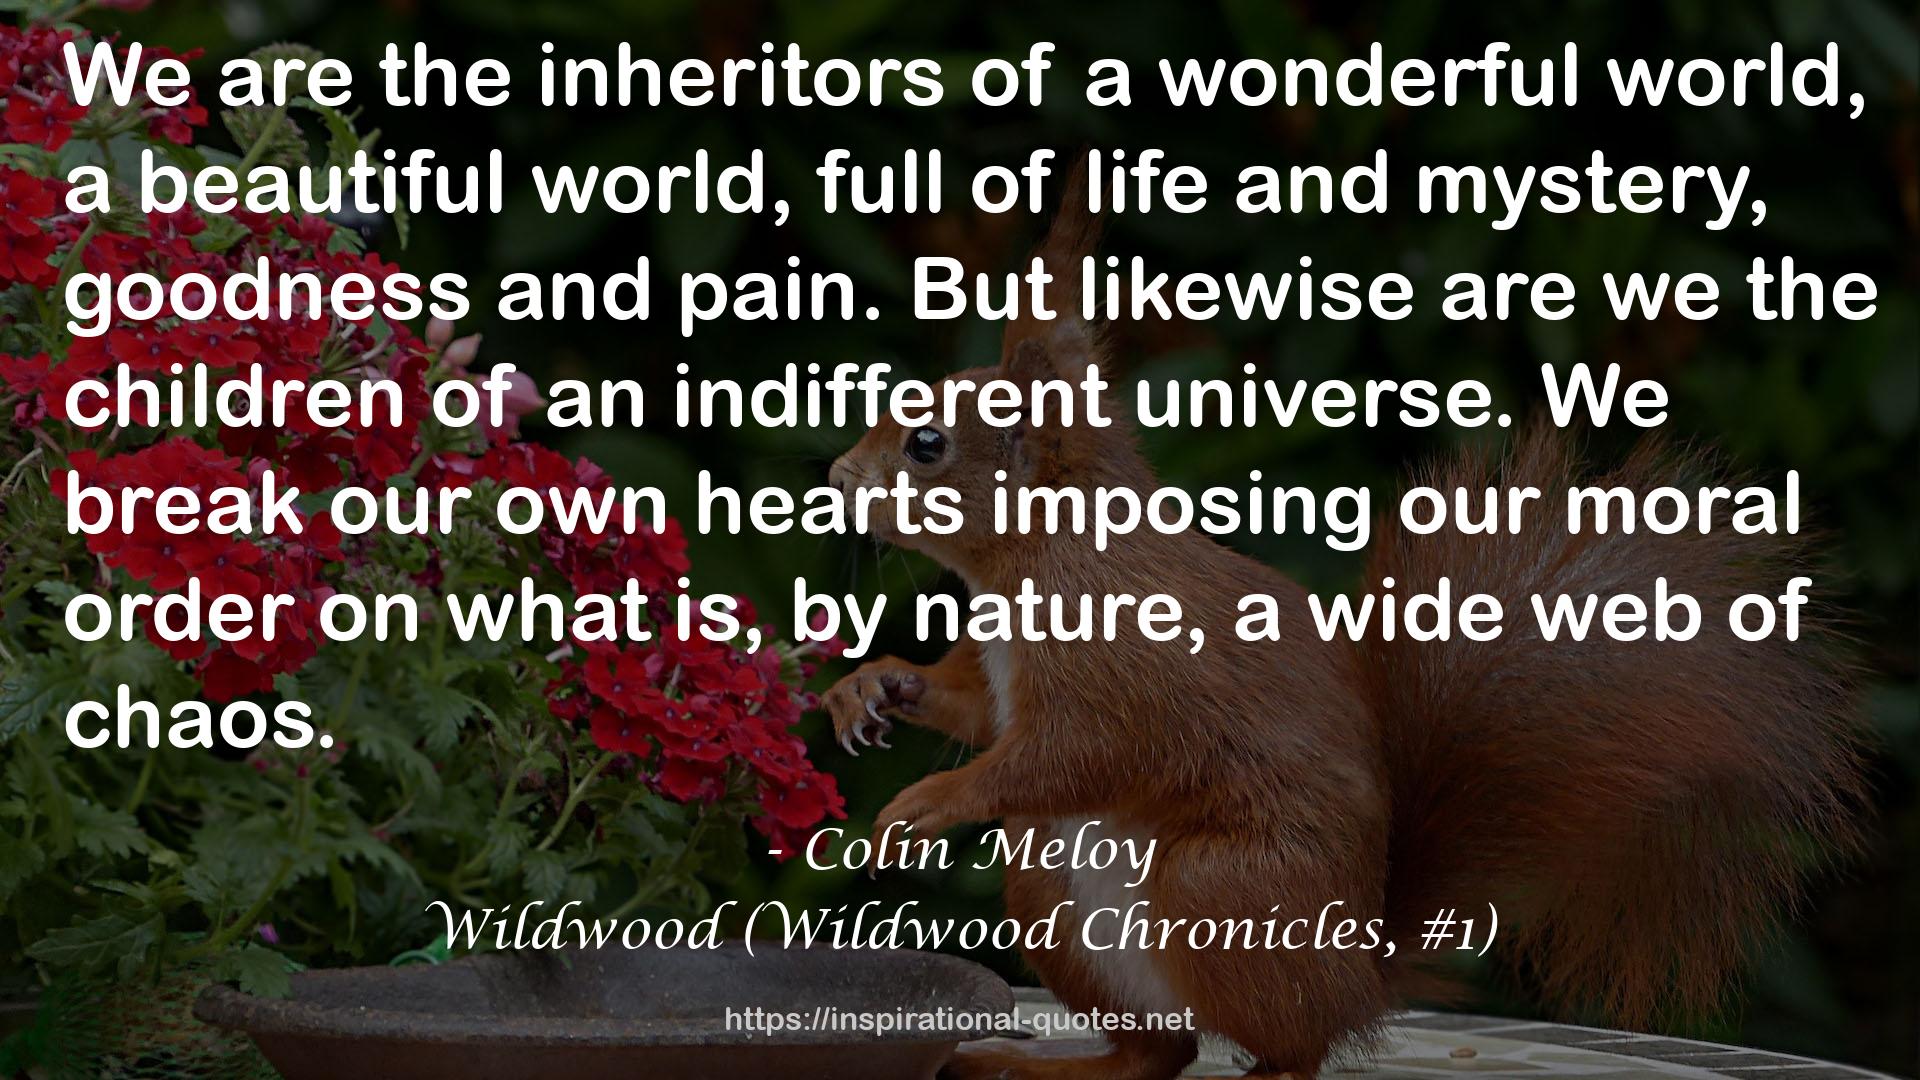 Colin Meloy QUOTES